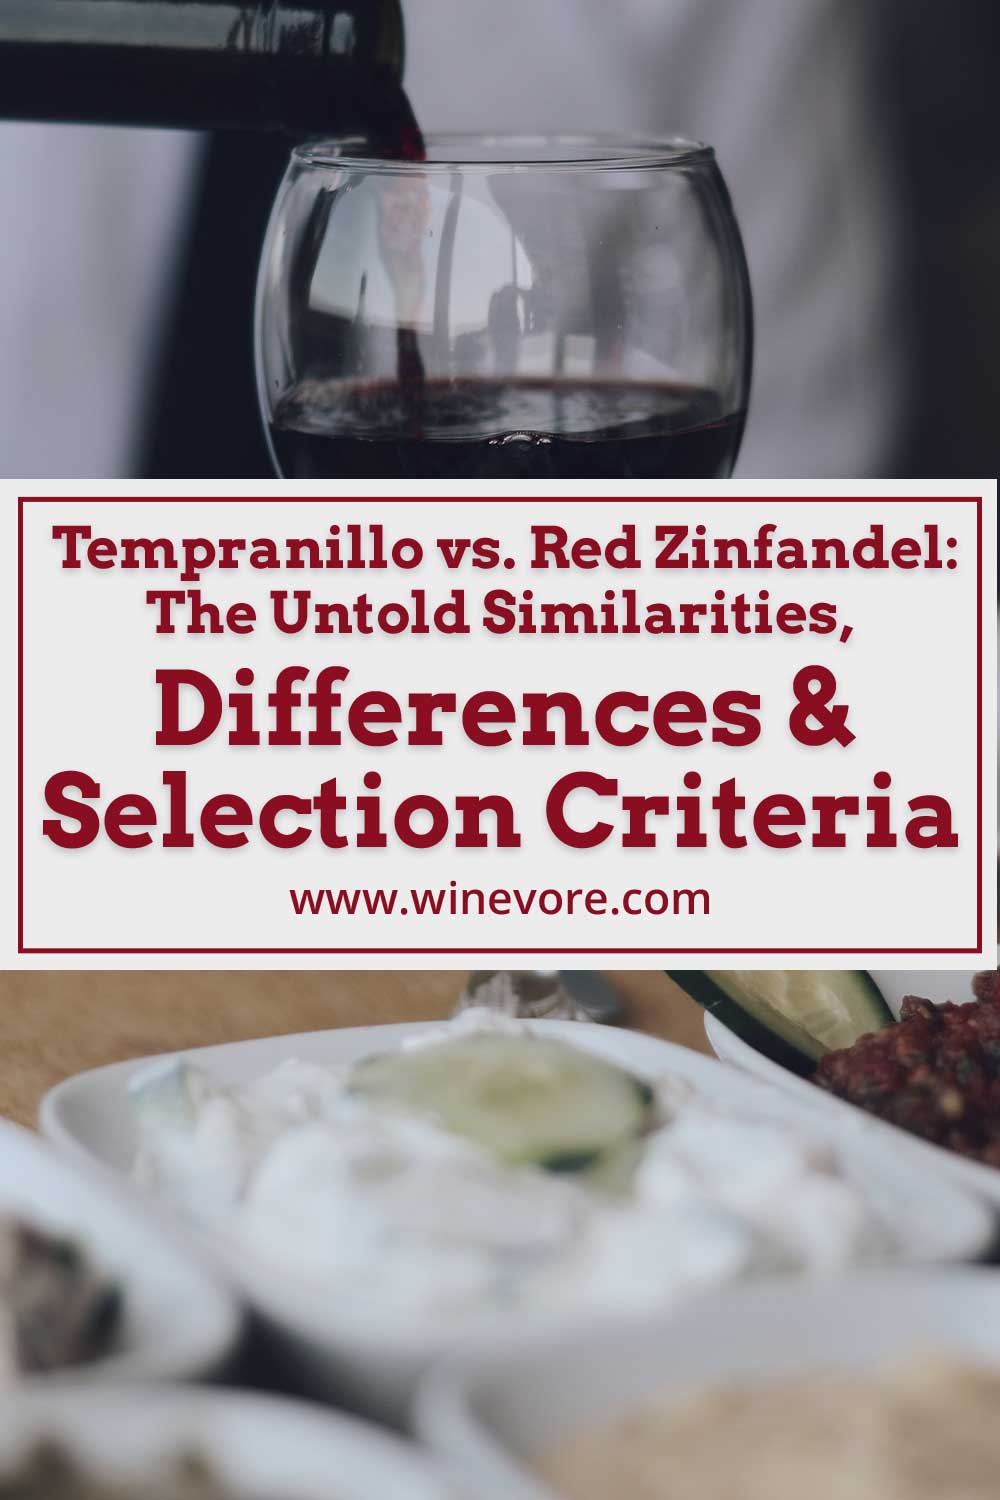 Wine being poured into a glass on table with food on it - Tempranillo vs. Red Zinfandel.